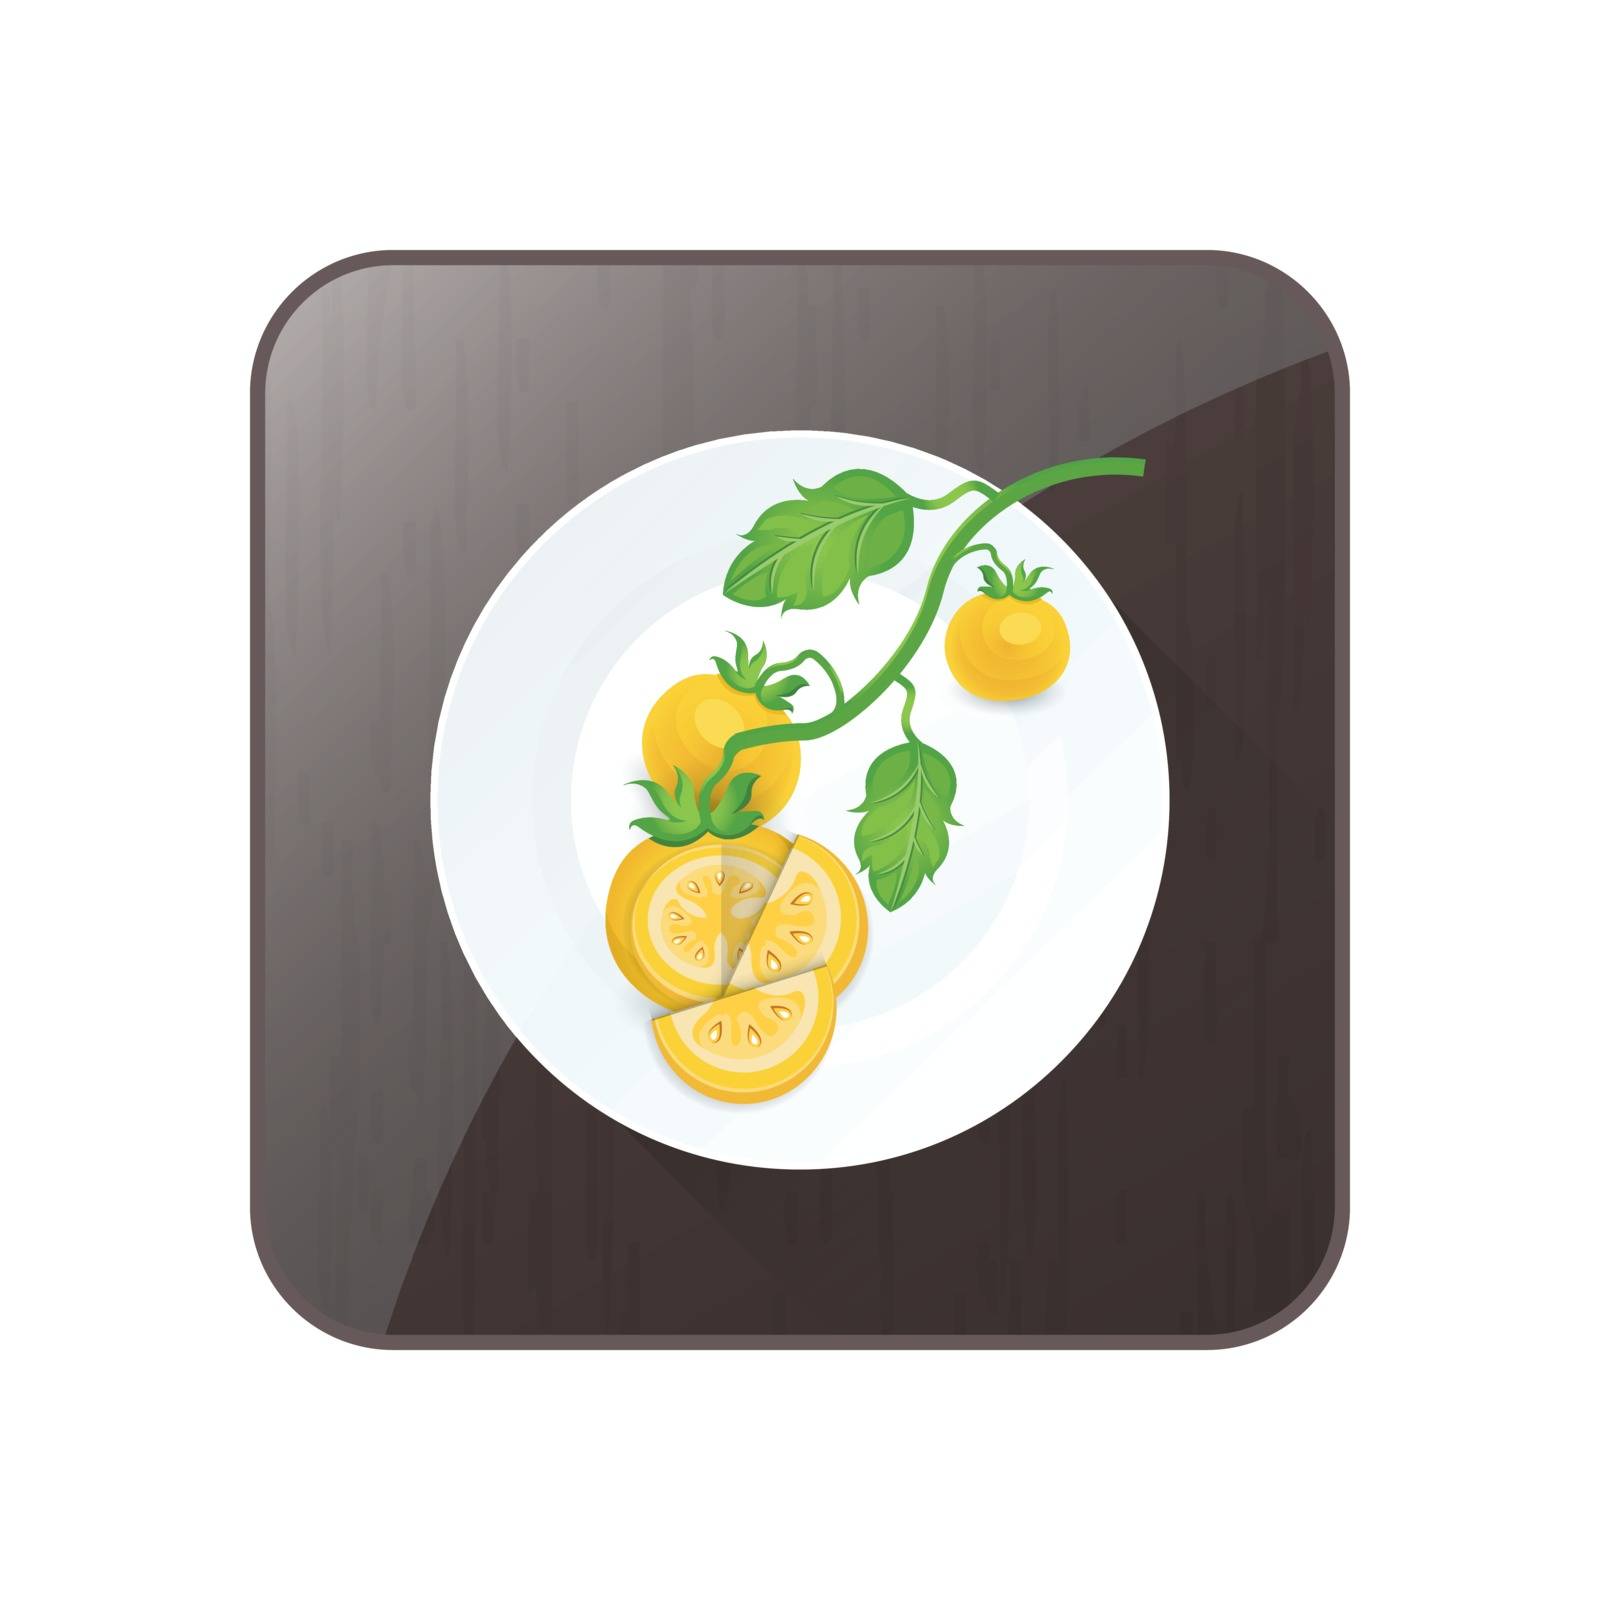 Tomato Yellow Color icon and button